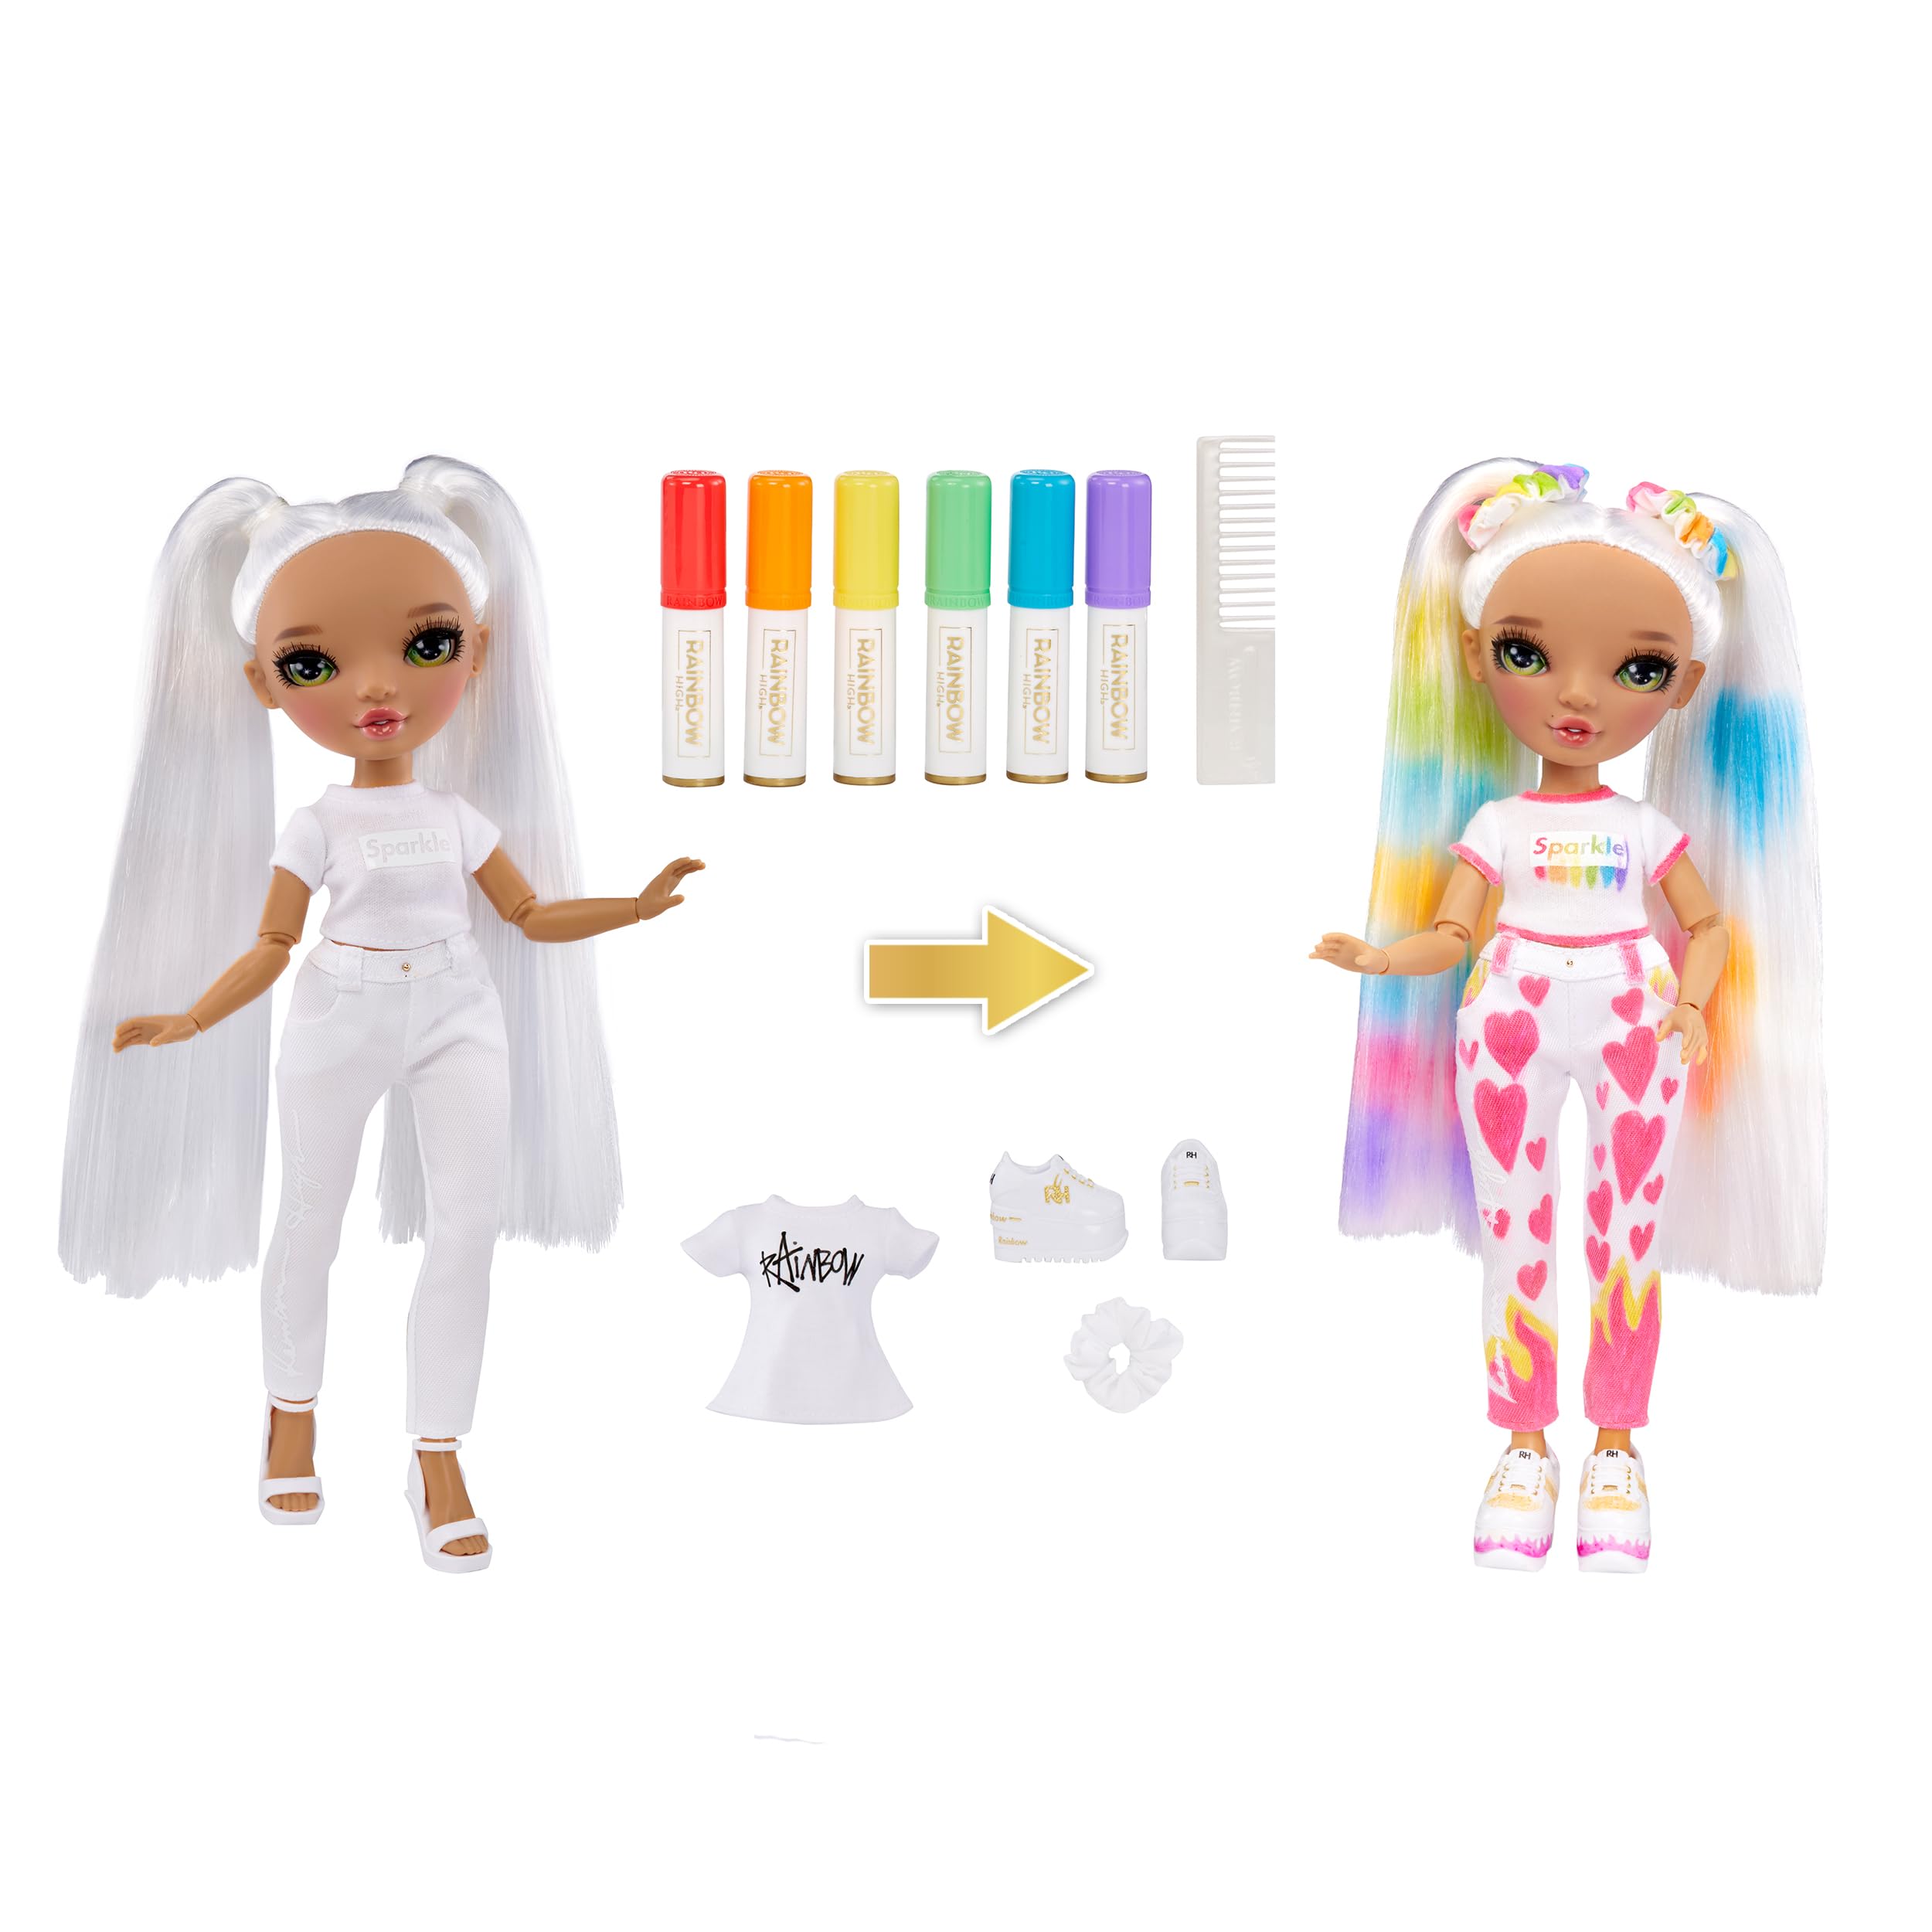 Rainbow High Color & Create Fashion DIY Doll with Green Eyes, Straight Hair in 2 Pig Tails, Bonus Top & Shoes, Washable Rainbow Markers. Color, Create, Play, Rinse and Repeat. Creative 4-12+